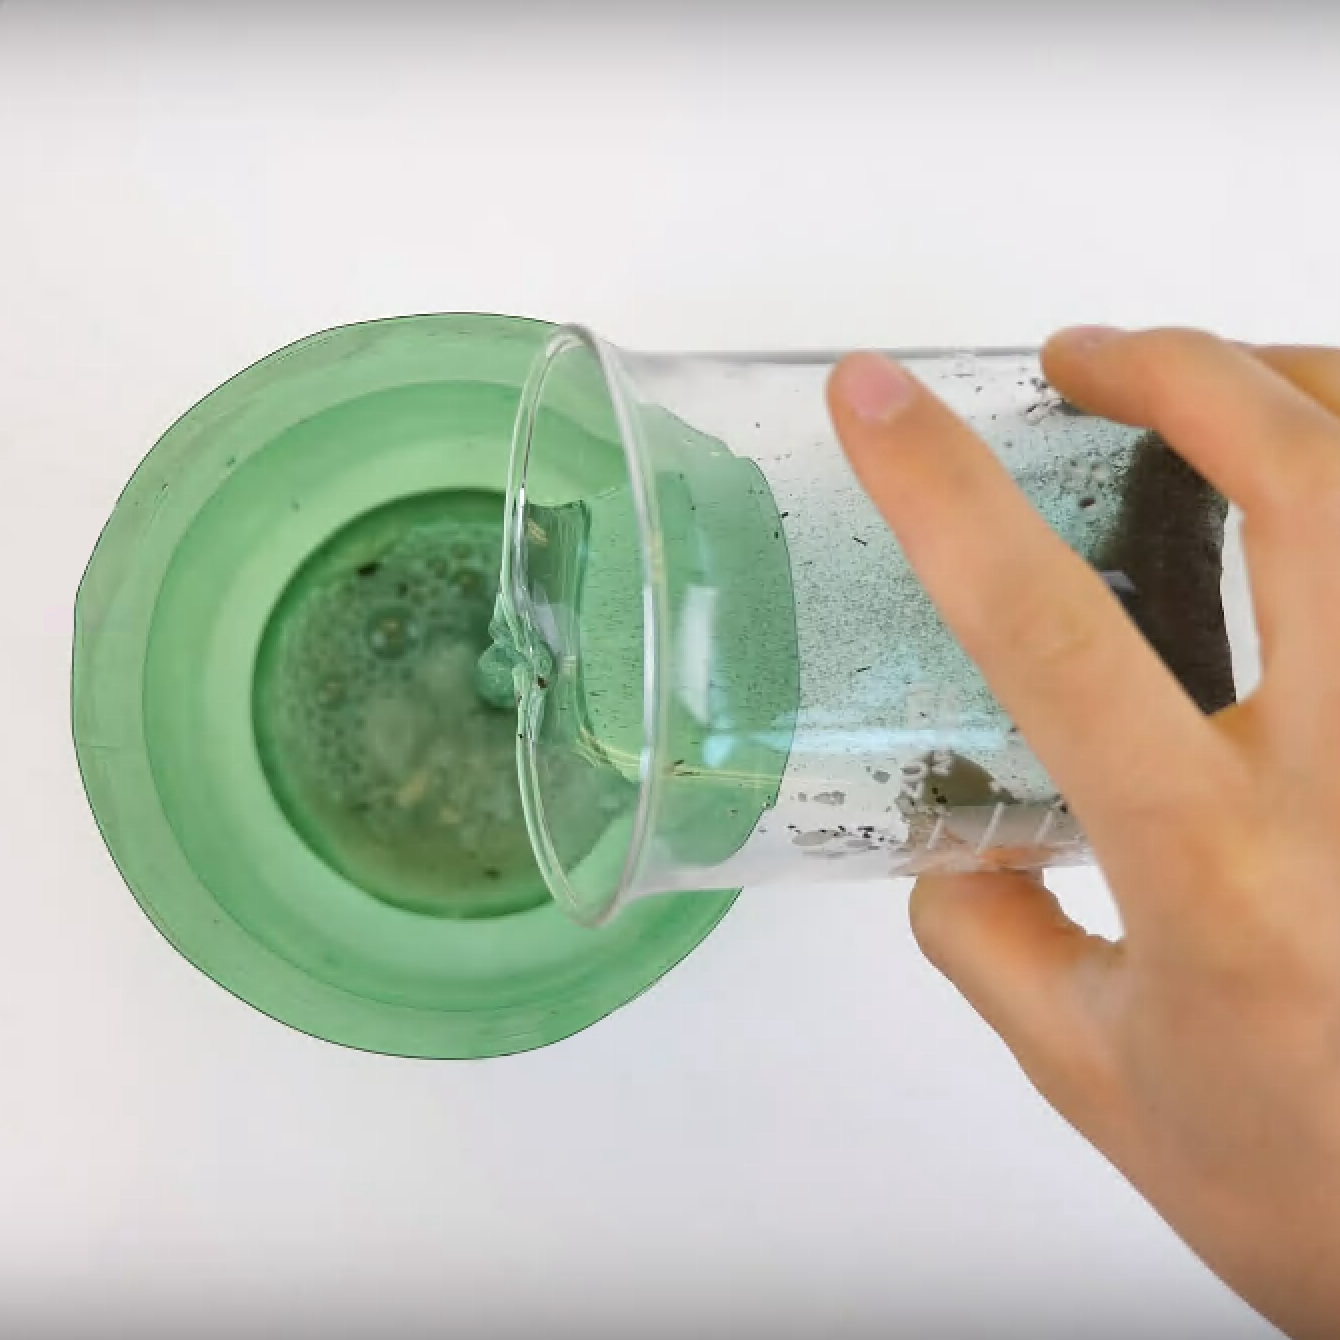 preview of 'The Dirty Water Project: Design-Build-Test Your Own Water Filters' Activity